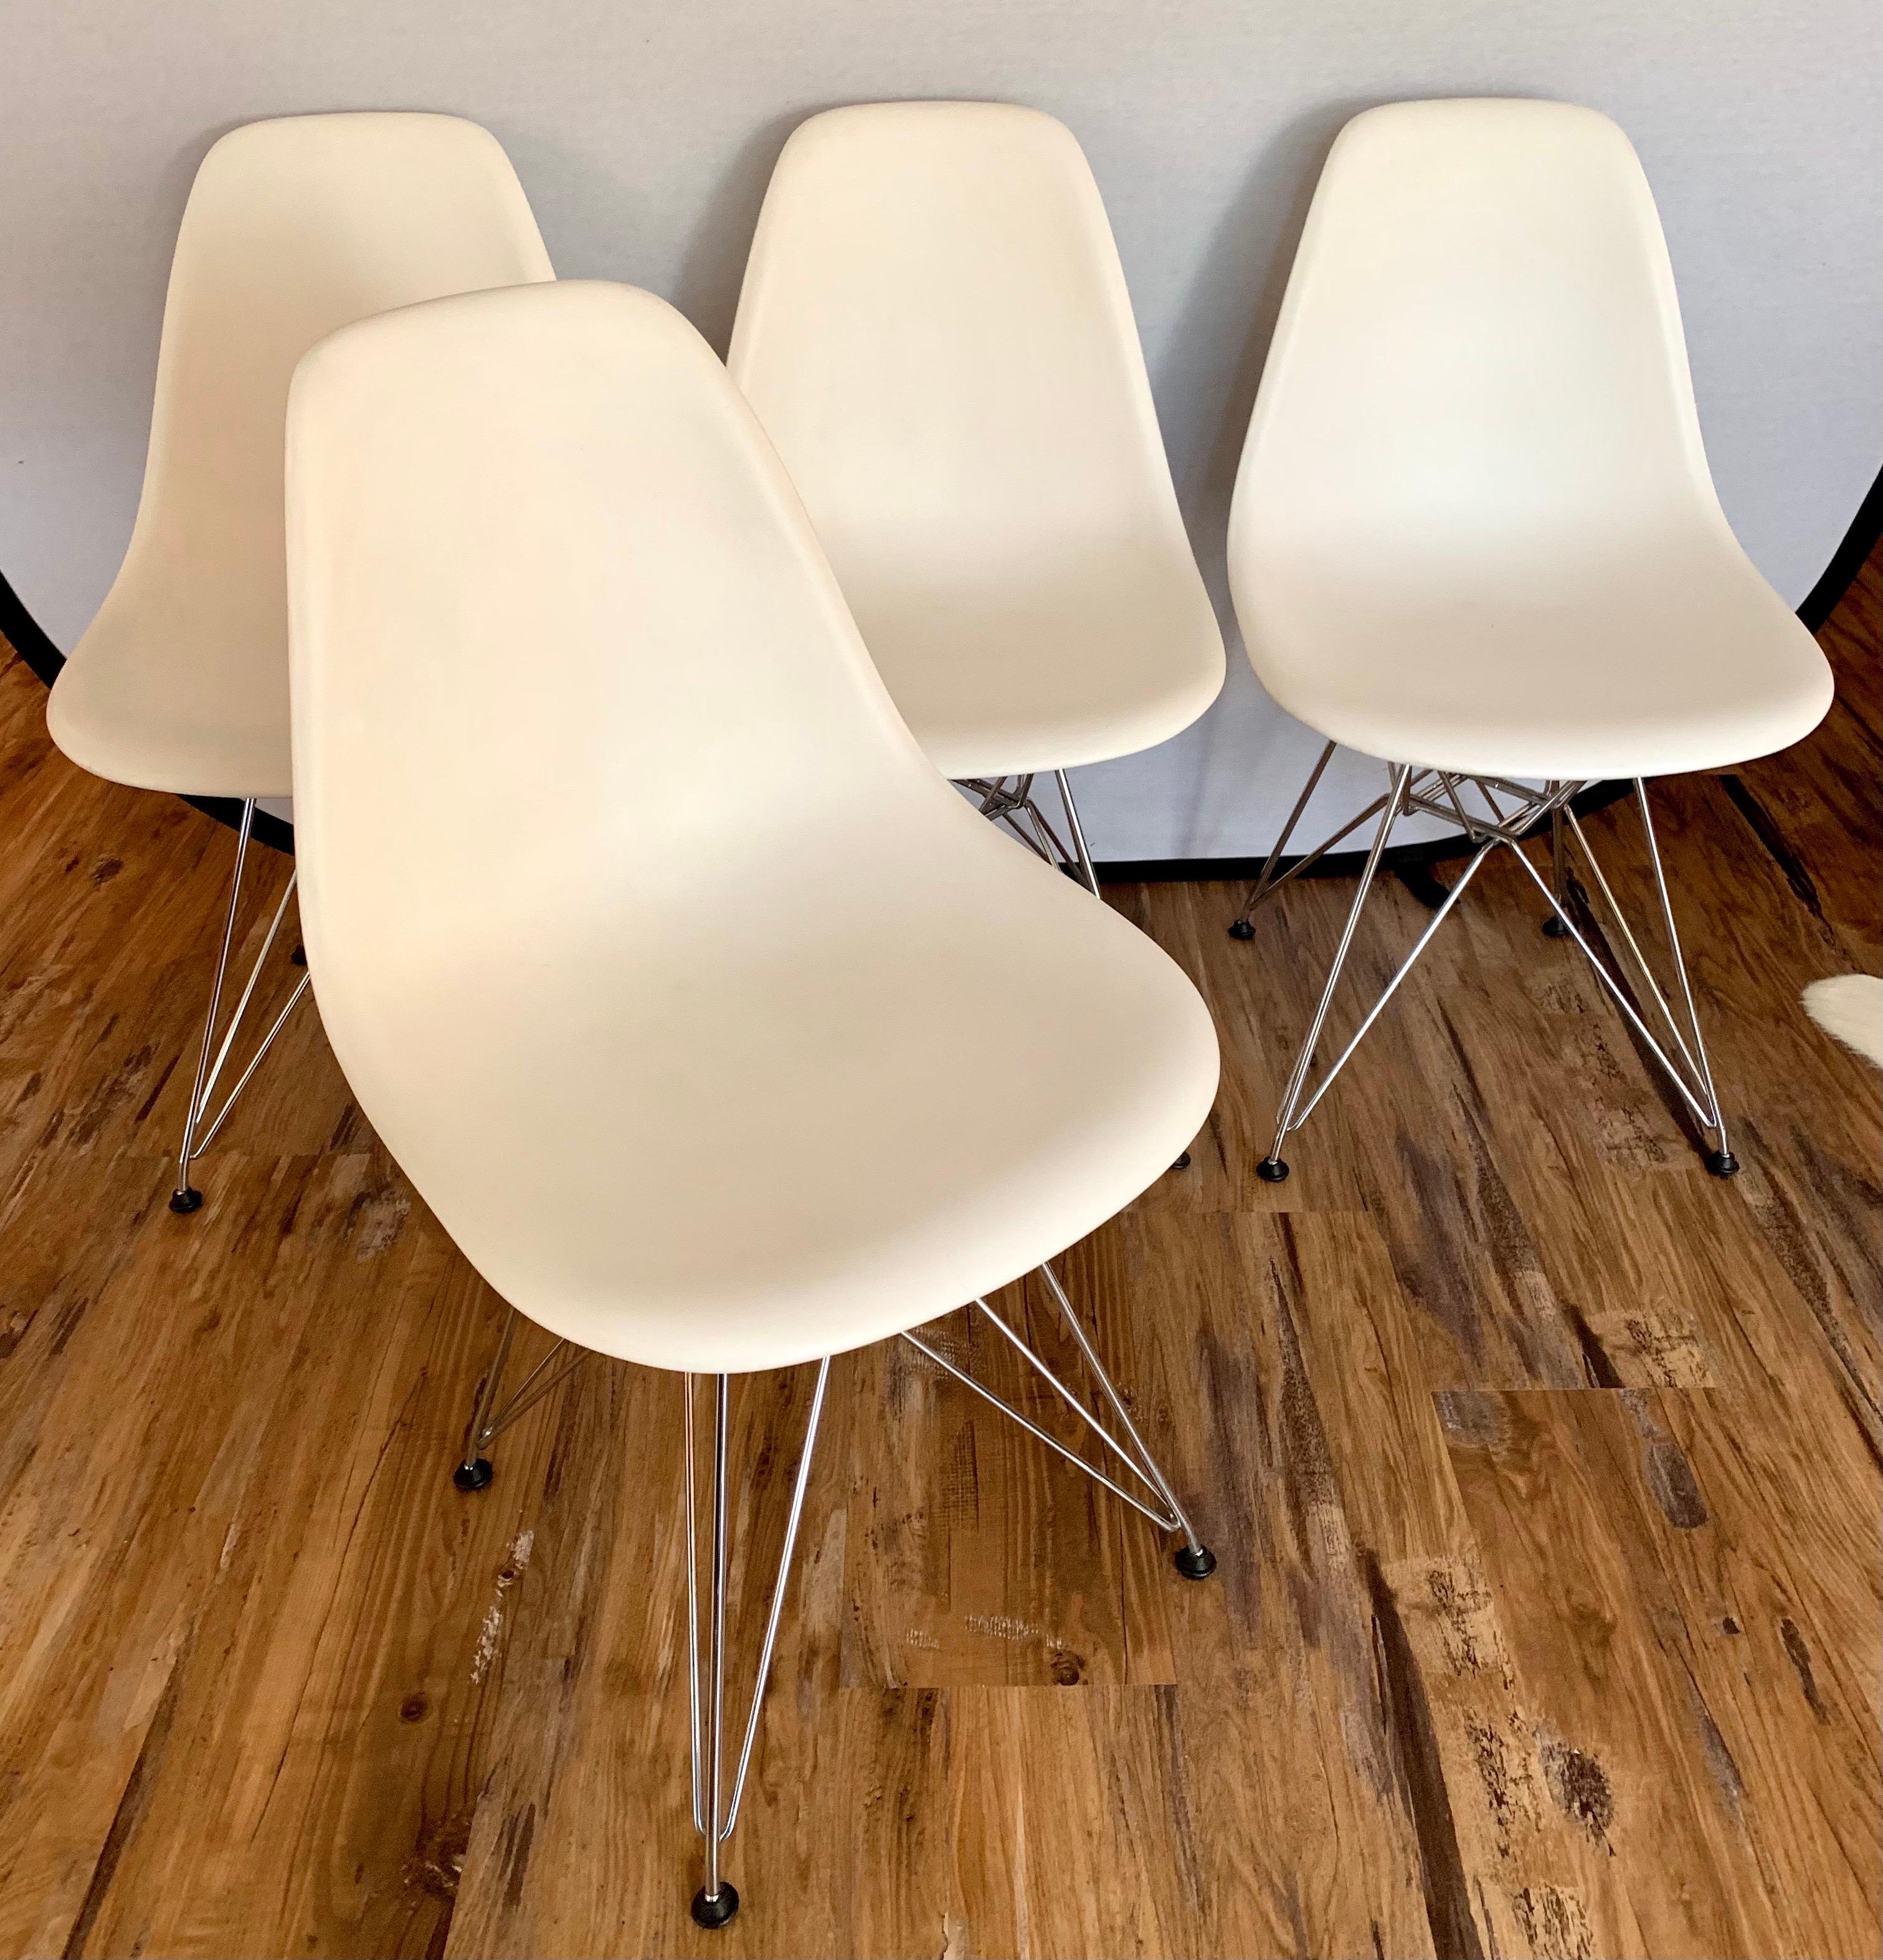 Iconic set of plastic Eames Office chairs which make great dining chairs as well. Designed by Charles and Ray Eames for Herman Miller. All hallmarks at bottom. Great scale and better lines. Colorway is white.